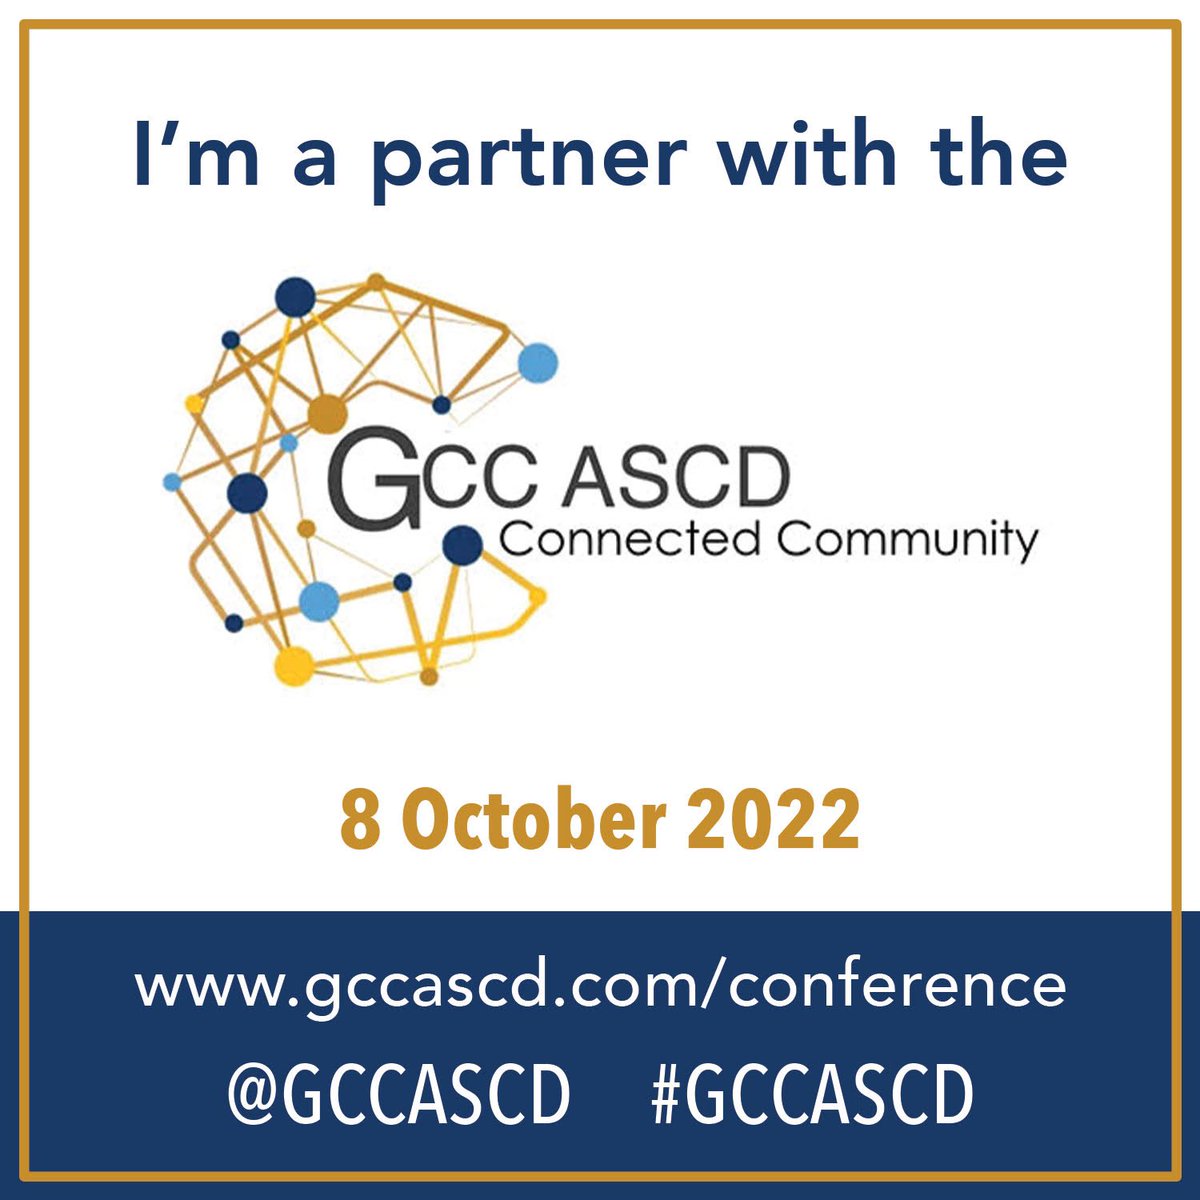 Resourceya is a partner with the @GCCASCD Conference happening on 8 October in Dubai #gccascd gccascd.com/conference/